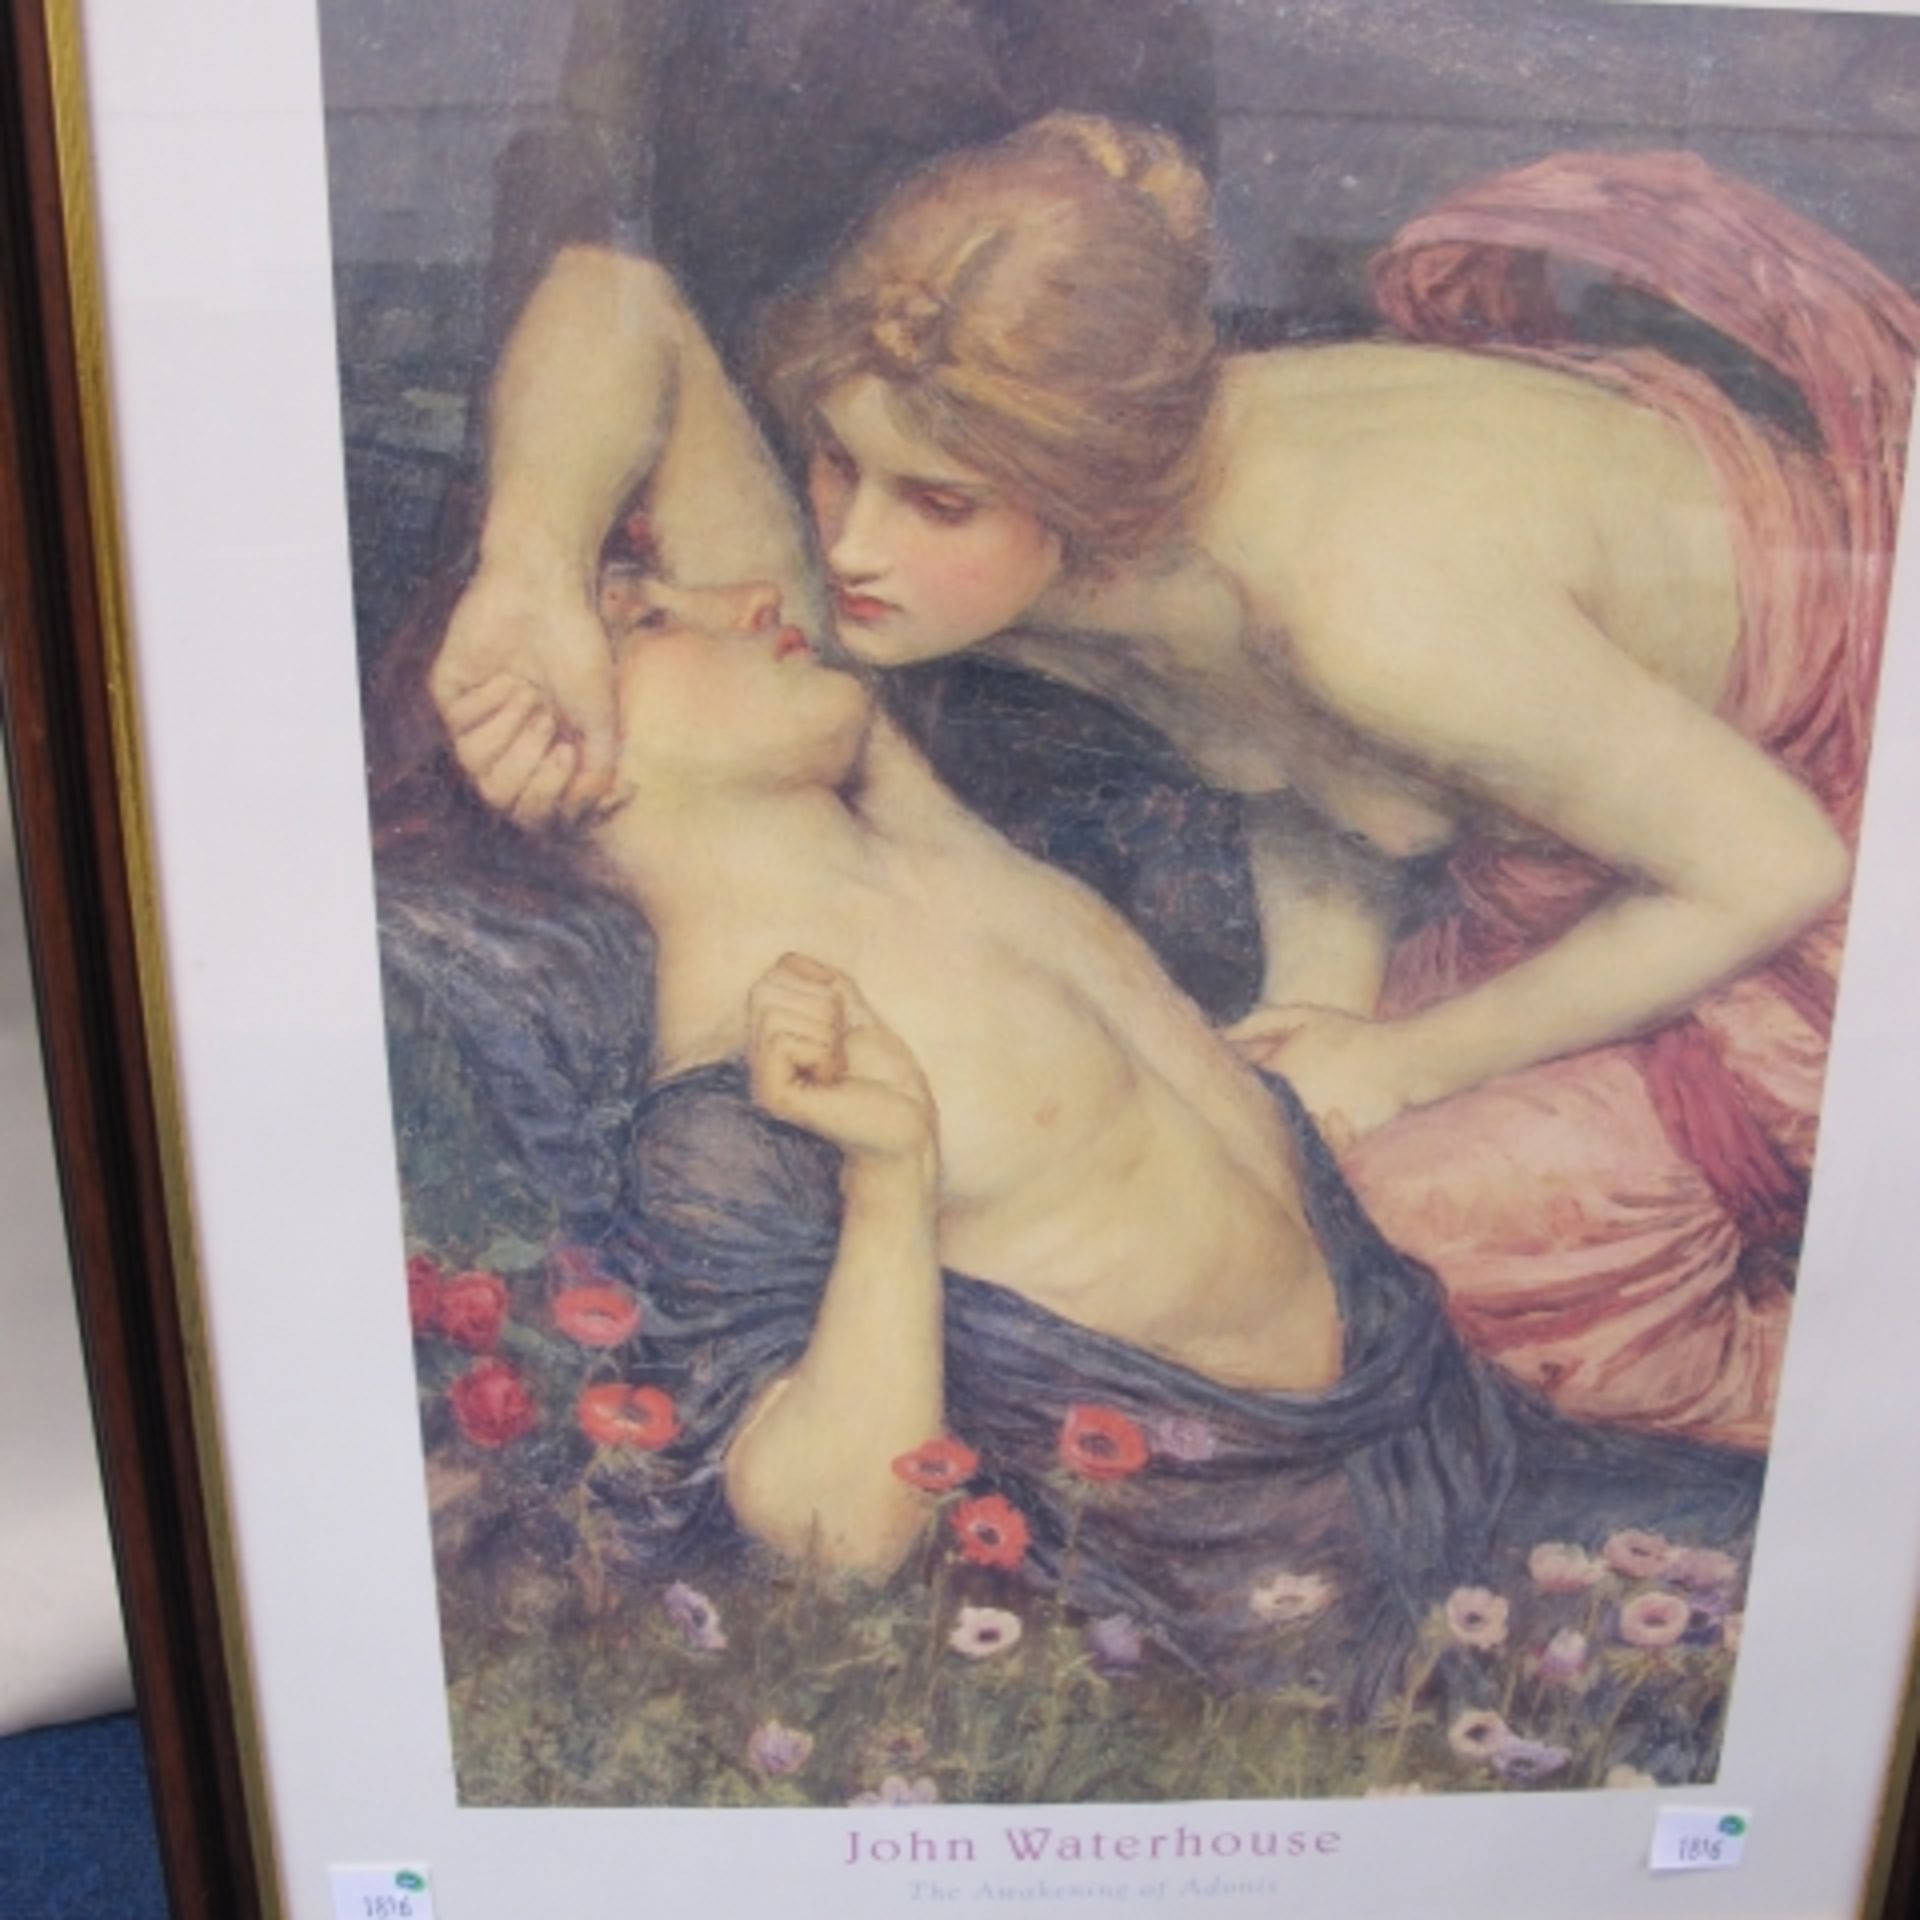 A Large Framed Print 'The Awakening of Adonis' by John Waterhouse (49.5cm x 38cm) In A Wooden